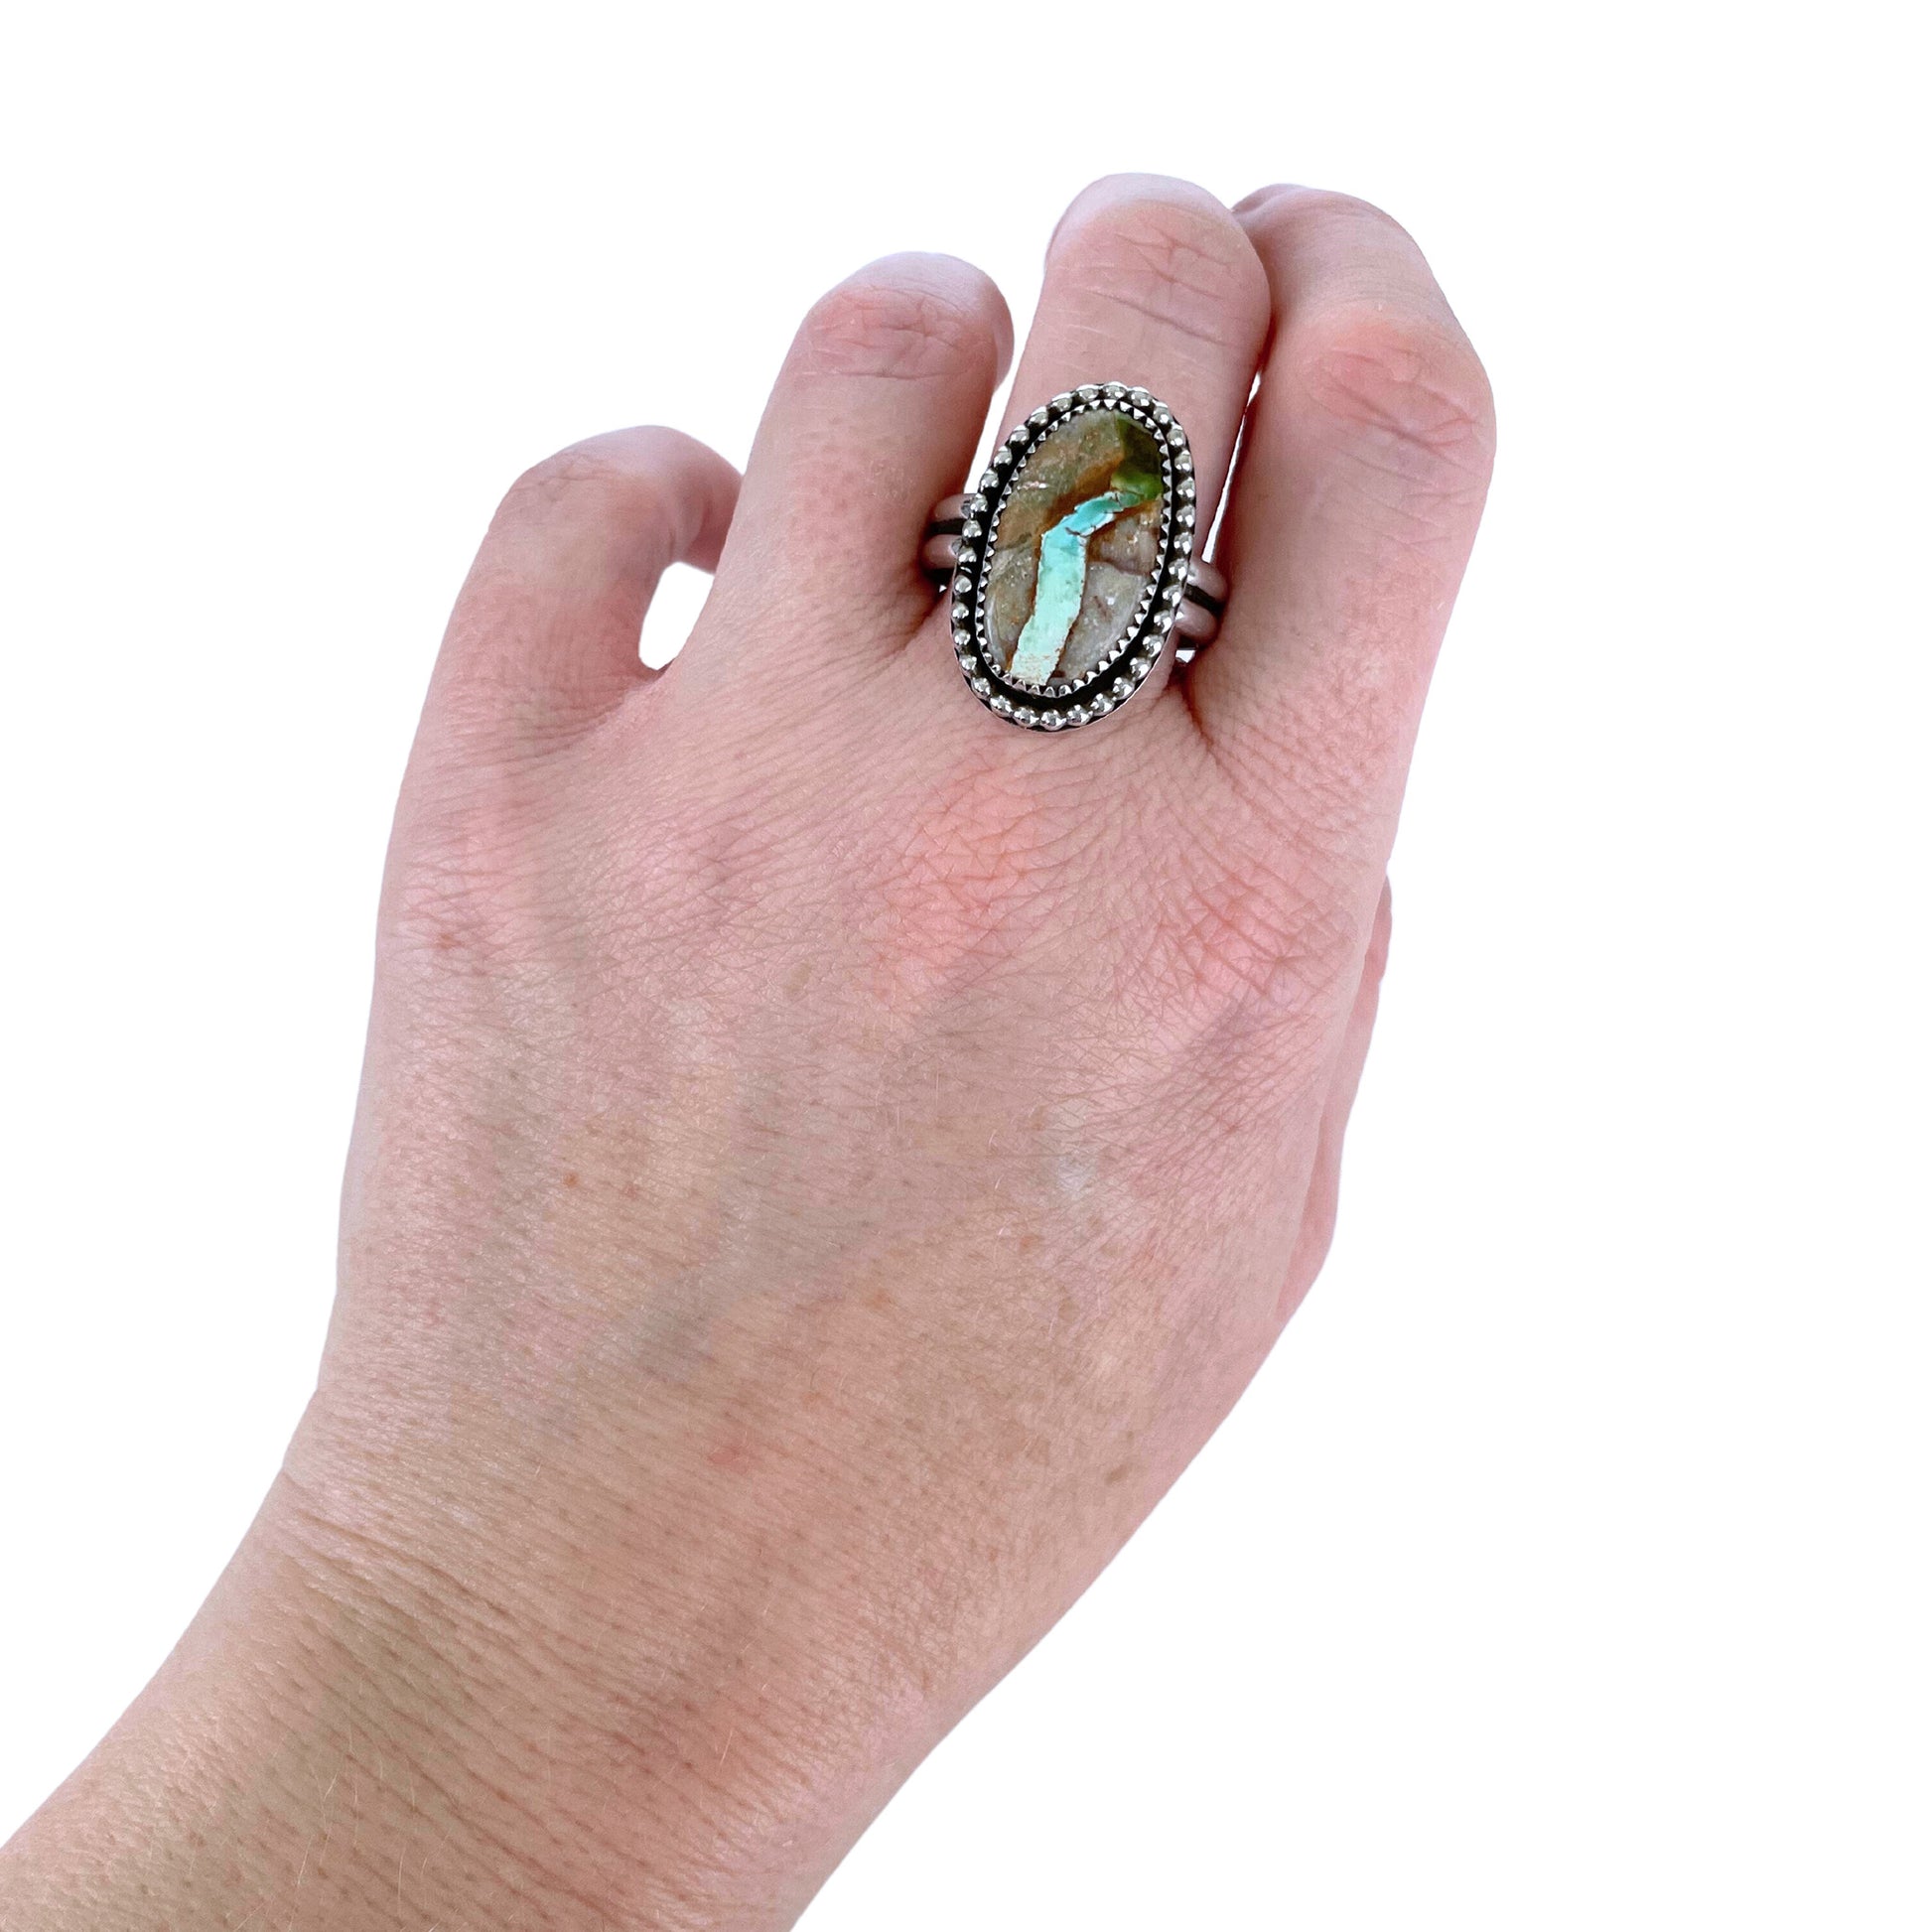 Royston Ribbon Turquoise Silver Ring, Size 9.5 - on hand worn on middle finger.